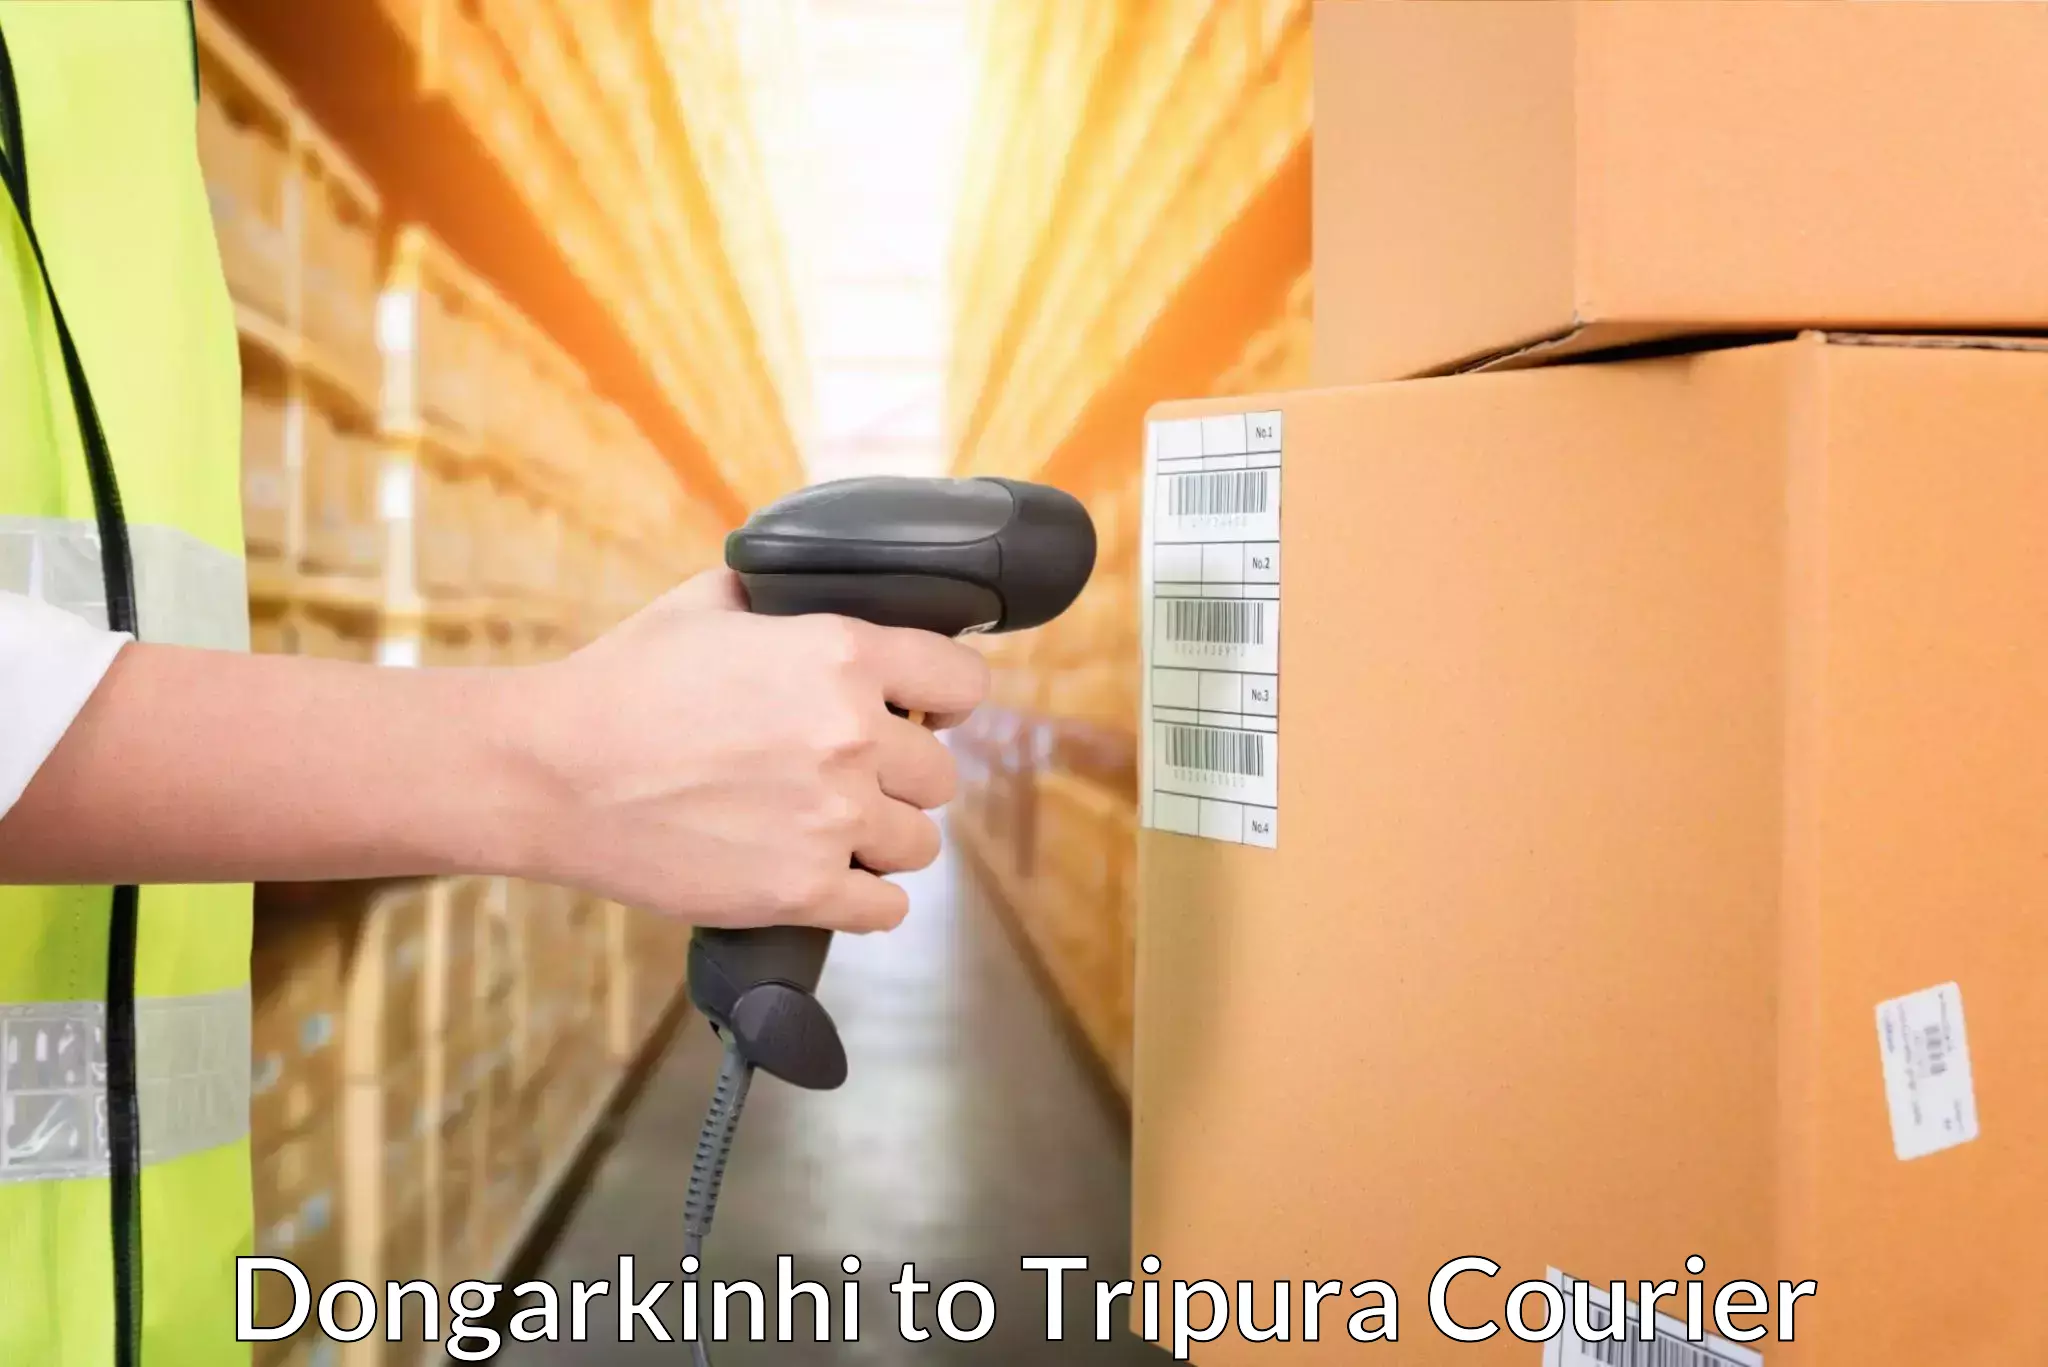 Premium delivery services in Dongarkinhi to Tripura